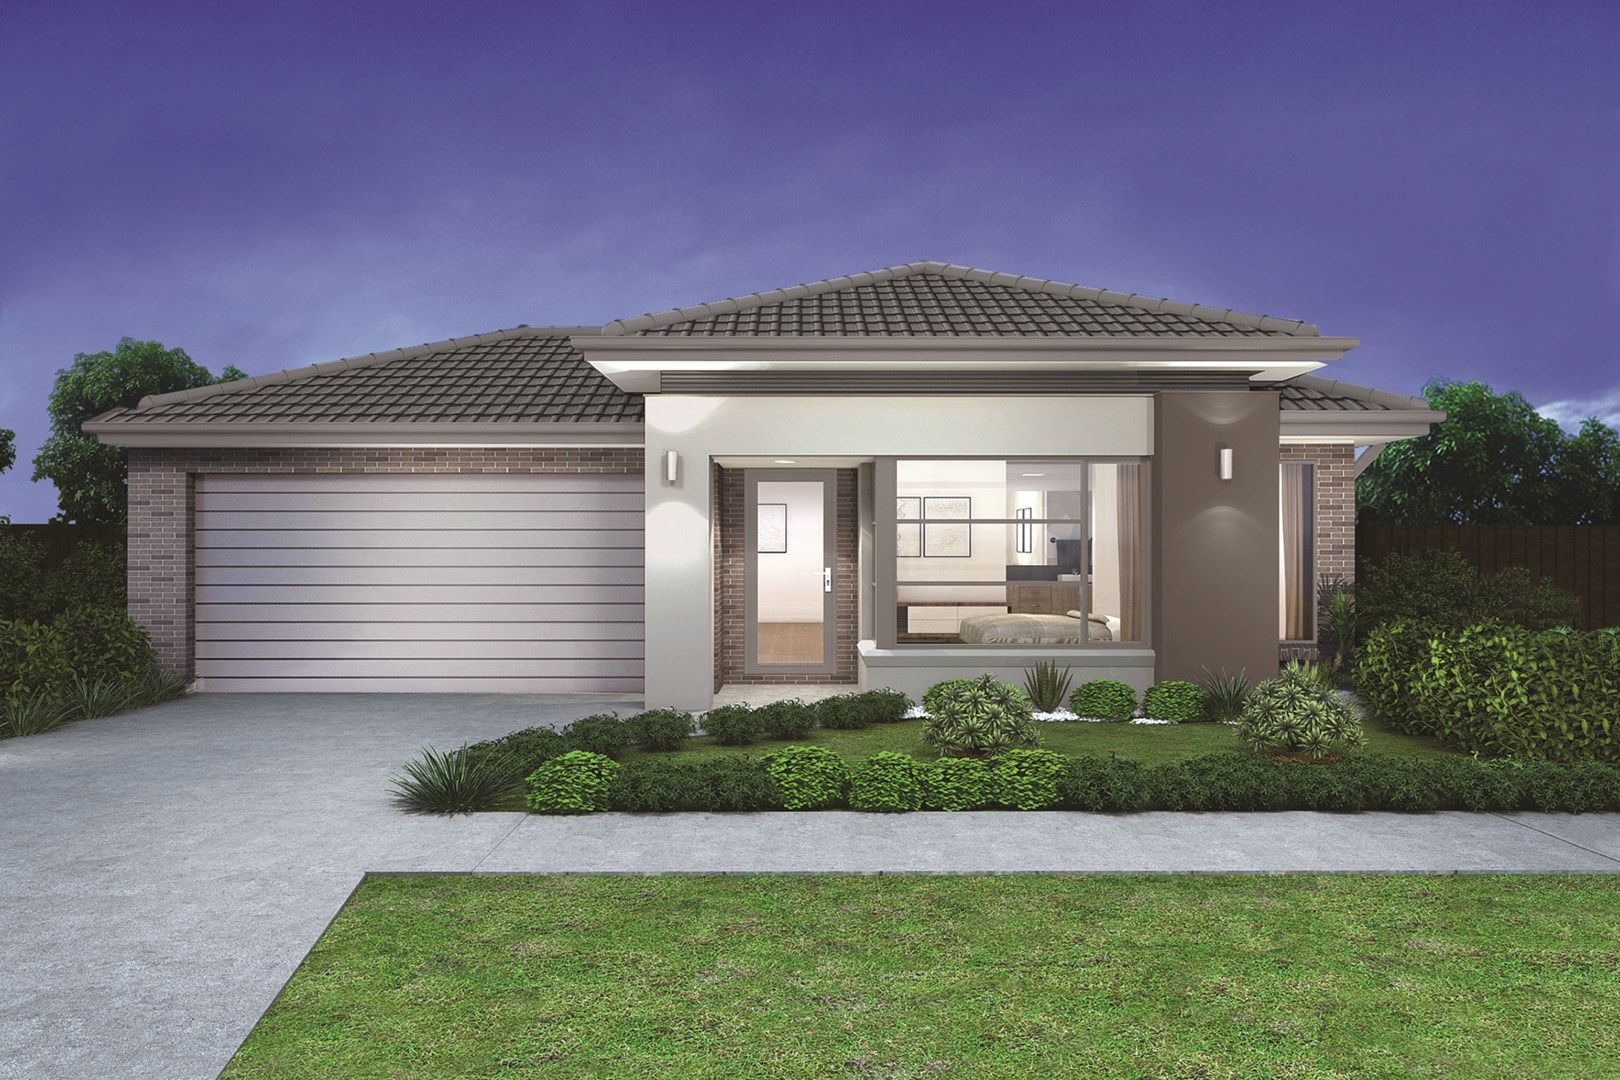 4 bedrooms New House & Land in Lot 403 Haymont Estate CHARLEMONT VIC, 3217